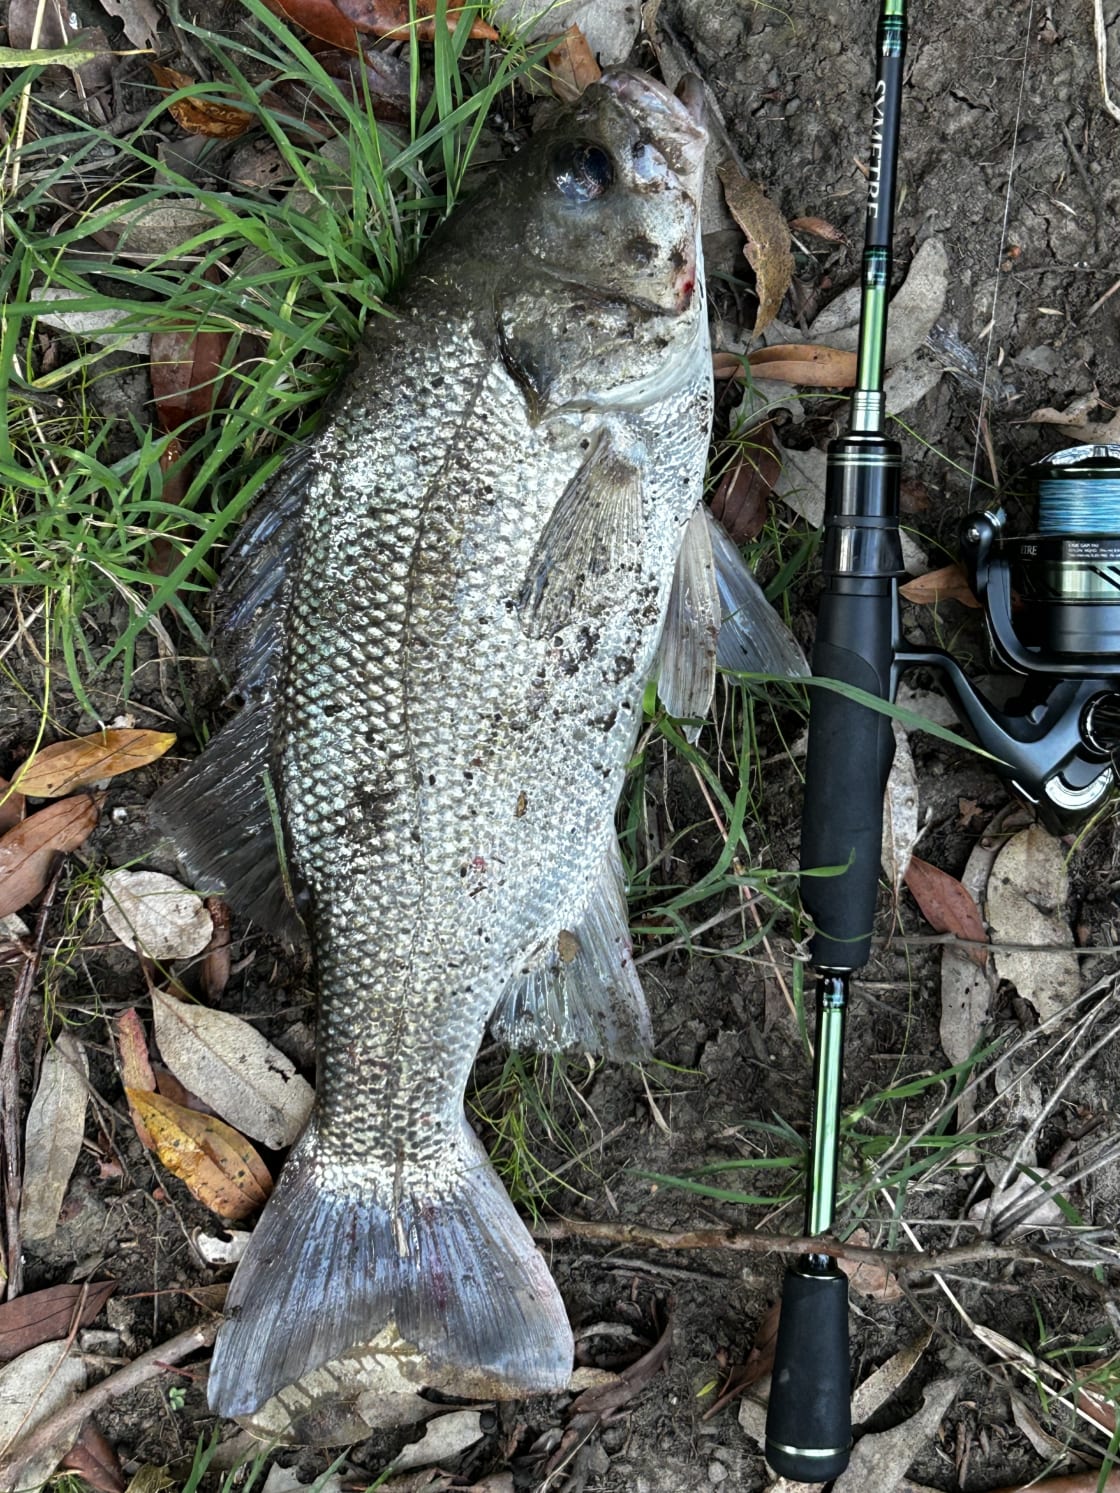 Bass caught in the creek 